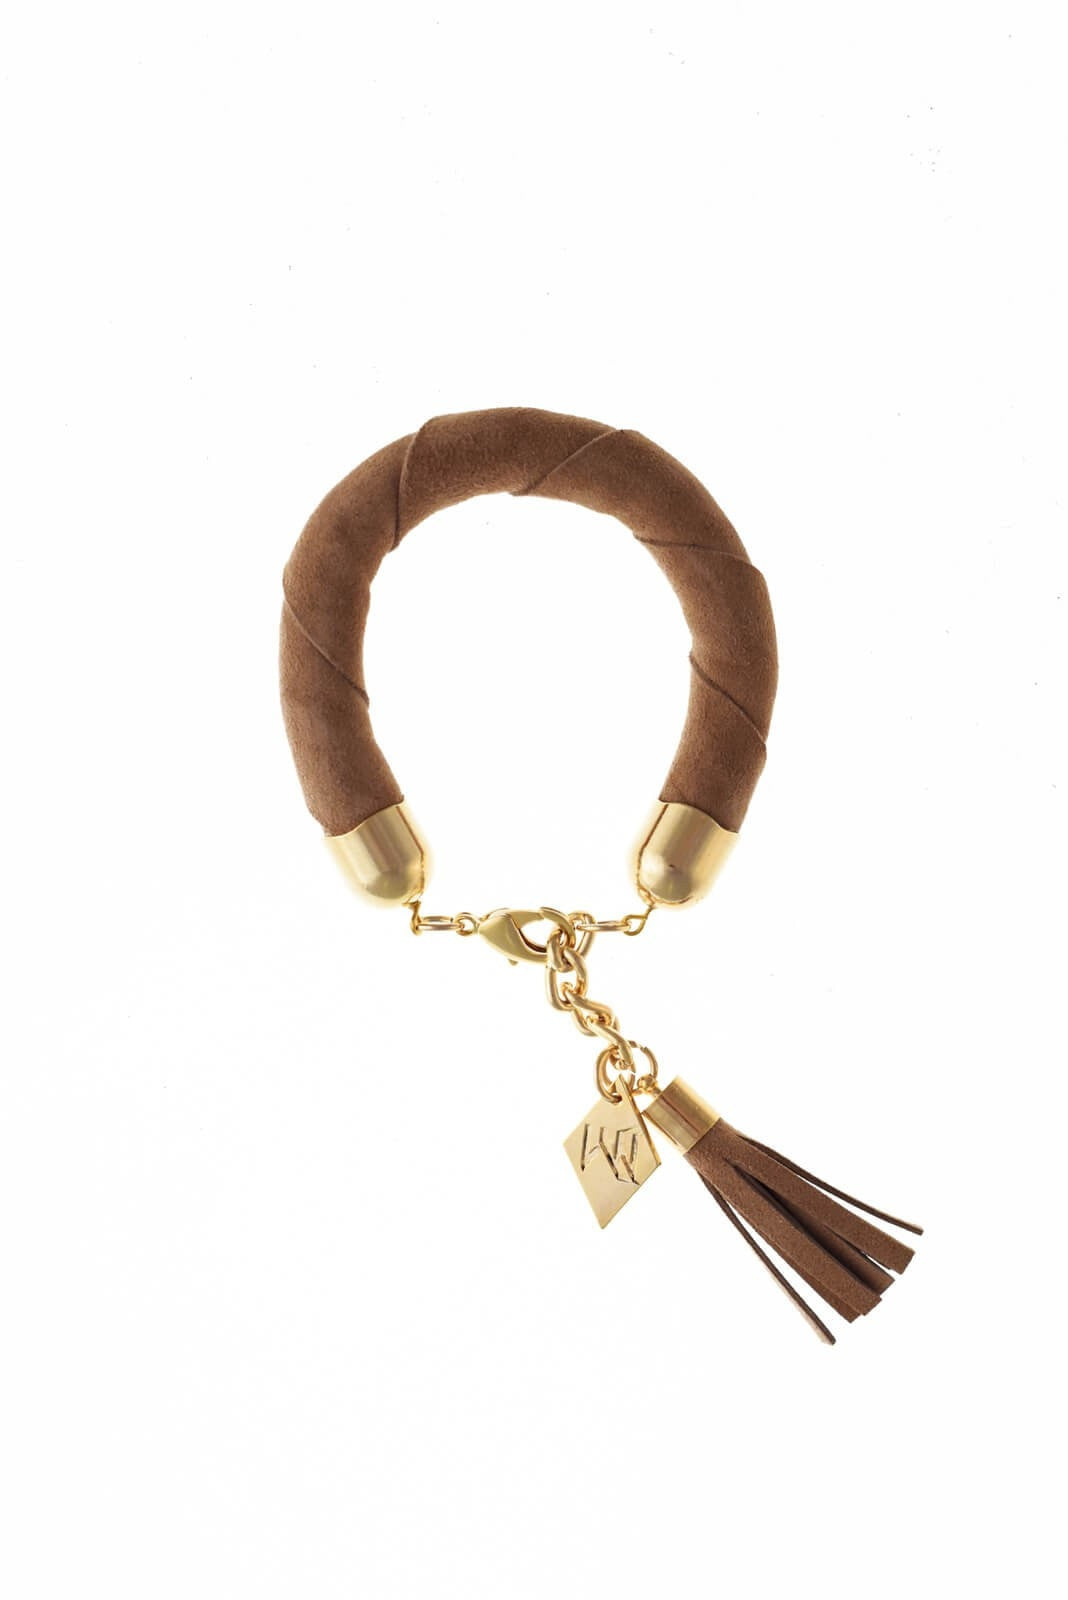 The no. 5 edition of the handcuff bracelet is made of beige suede with galvanized metal components with leather tassel. Gold edition.